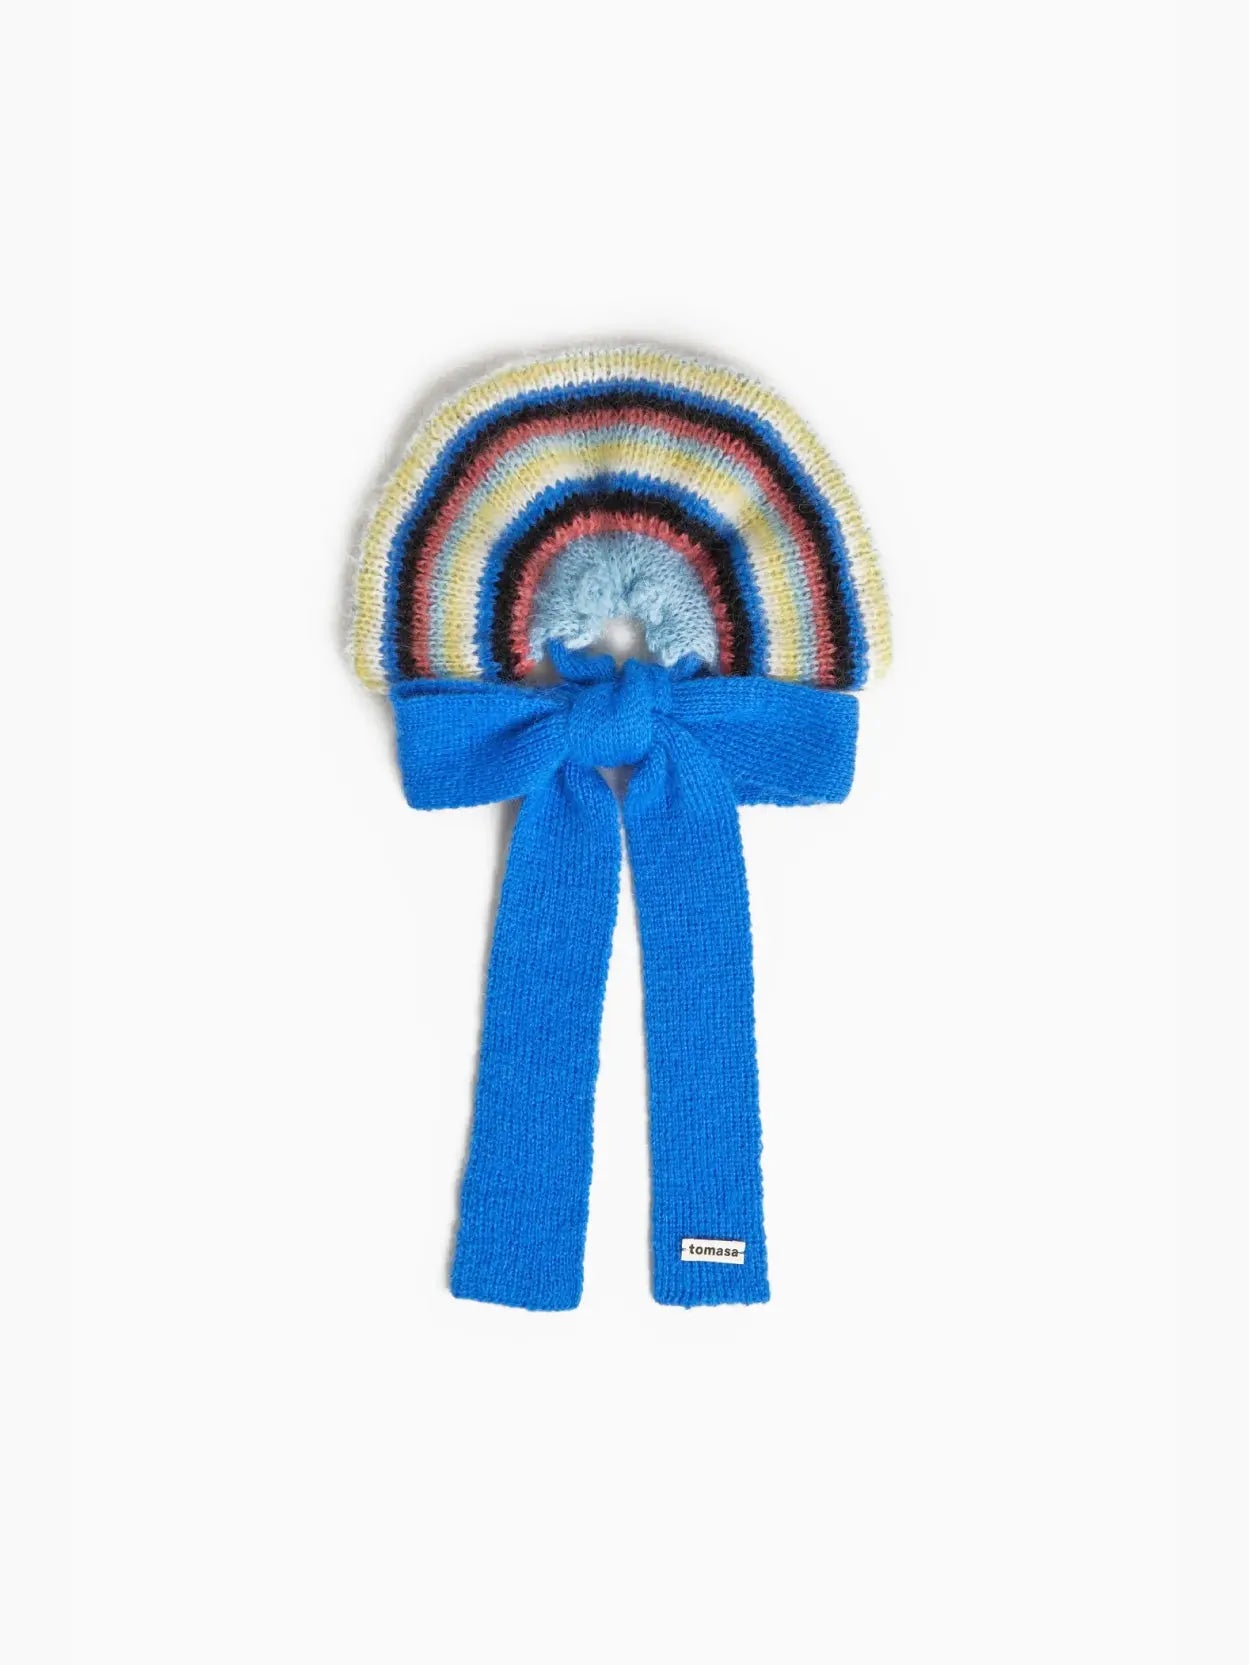 An Elvira Bow Scrunchie by Tomasa resembling a rainbow with pastel colors, transitioning from light to dark hues. It has a light blue center and a bright blue tied end, with a small white label. The background is plain white, perfect for showcasing this charming accessory available at Bassalstore in Barcelona.